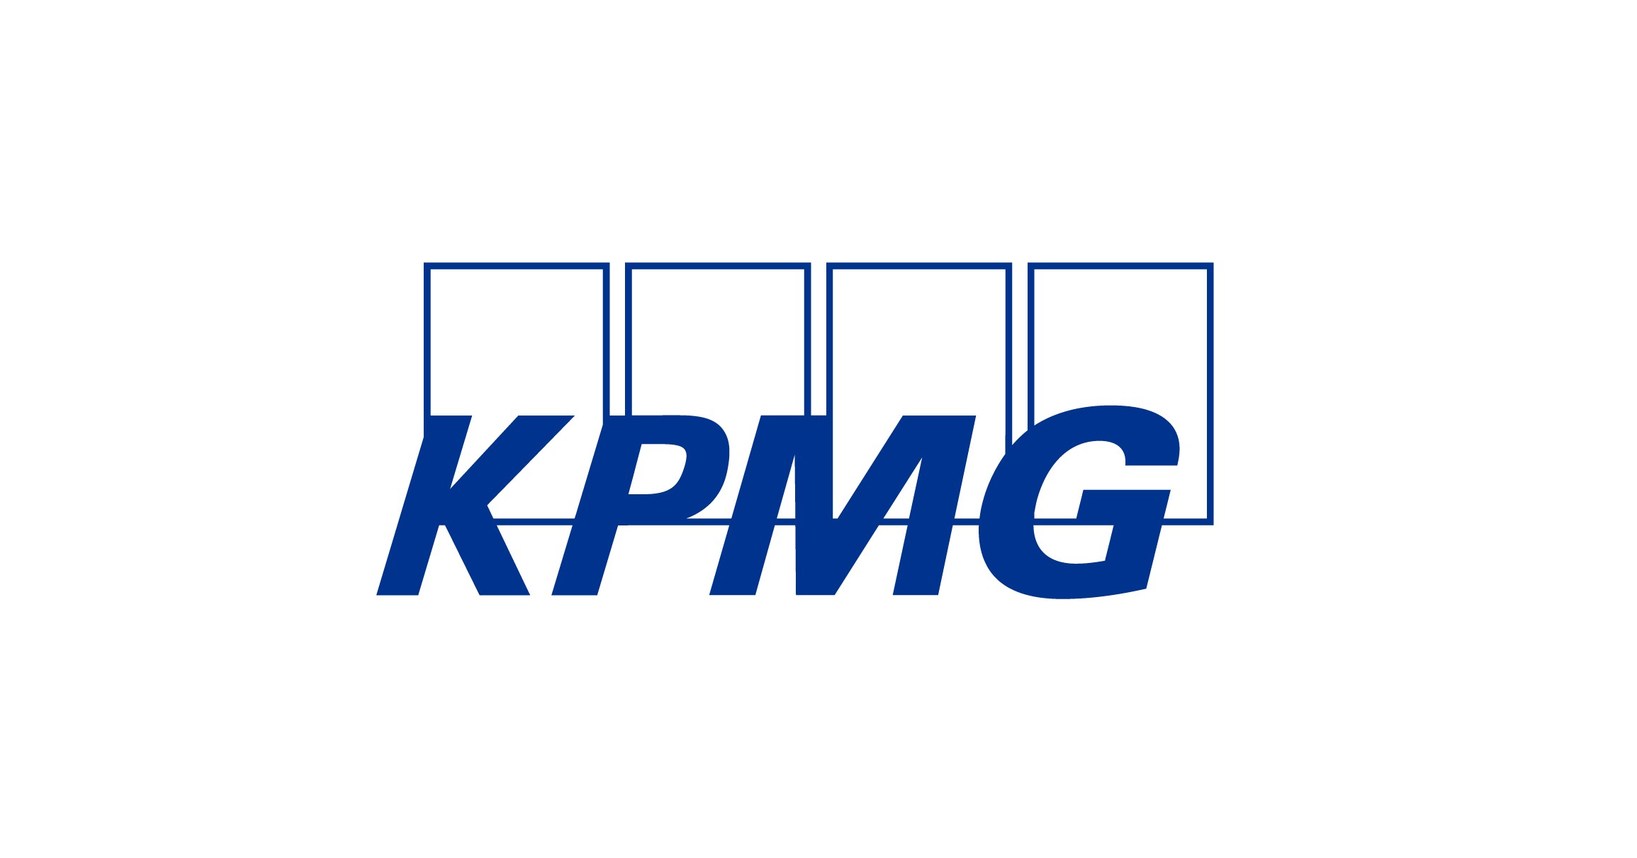 KPMG POISED TO CAPITALIZE ON INCREASED DEMAND FOR OUTSOURCING CORPORATE TAX DEPARTMENTS